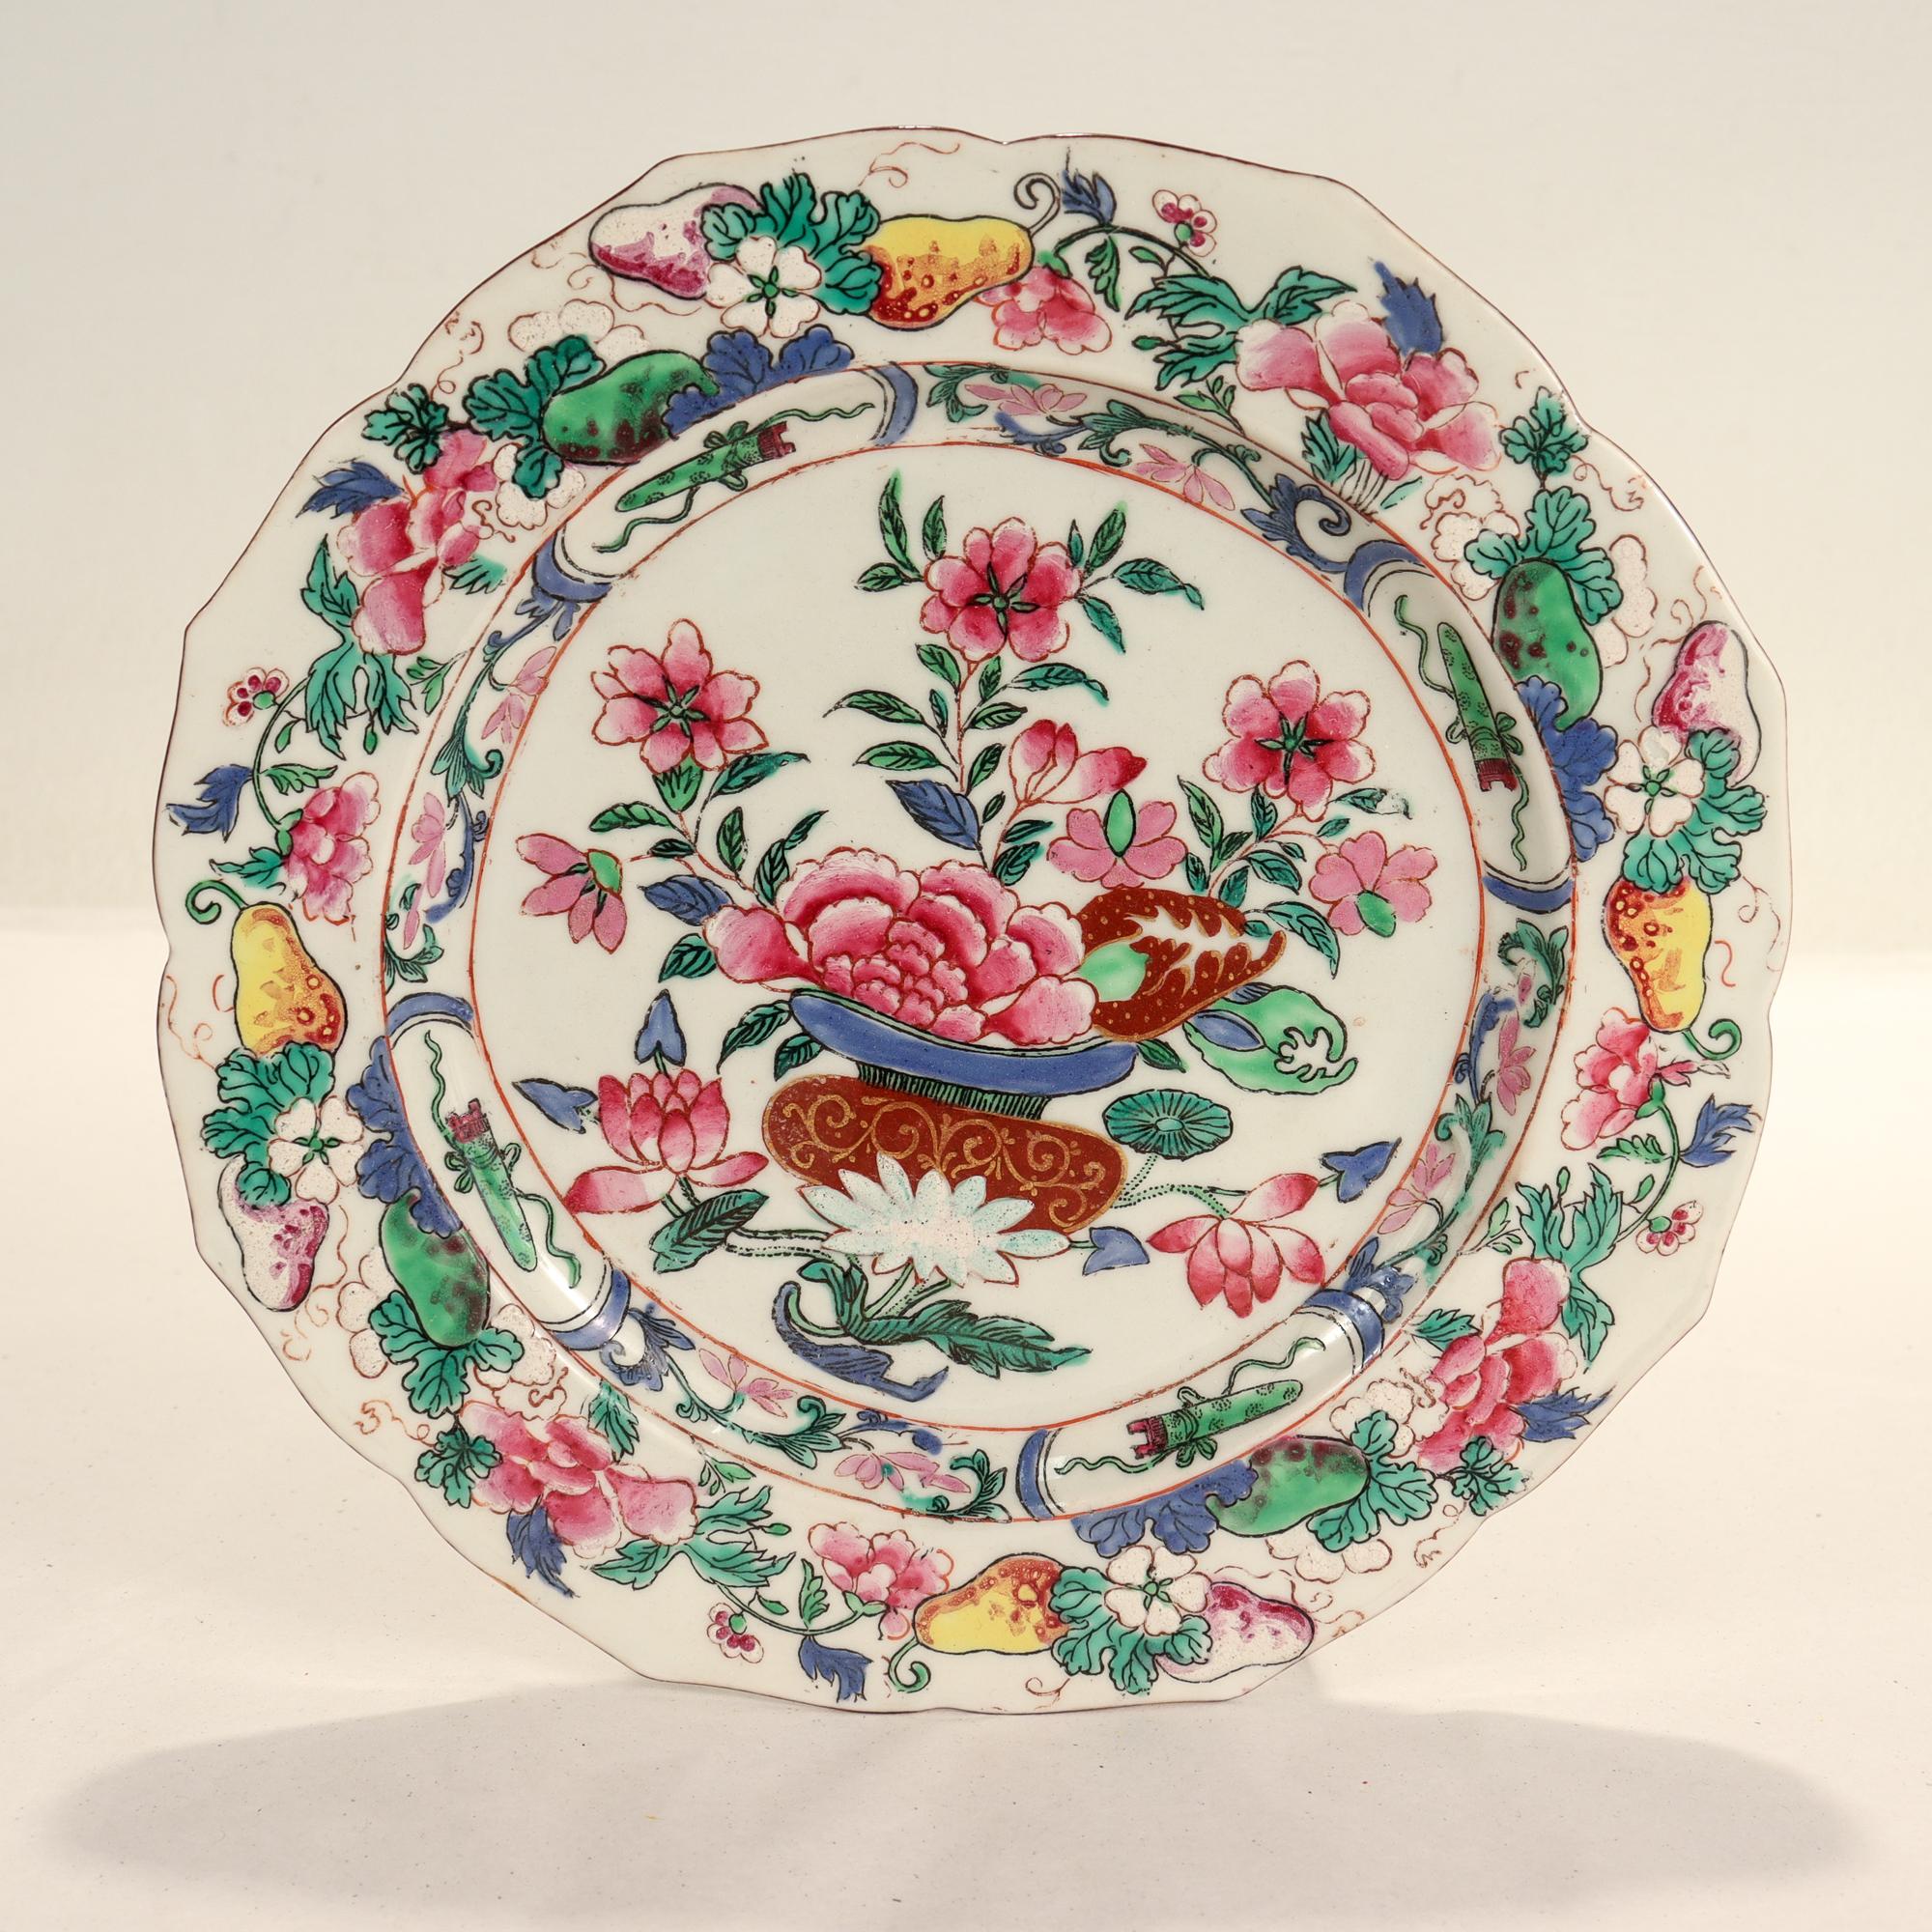 A fine old or antique Chinese export porcelain plate

In the Famille Rose style.

Decorated throughout with enamel floral decoration in primarily pink against a white ground.

Simply a great Chinese export plate!

Date:
Early 20th century